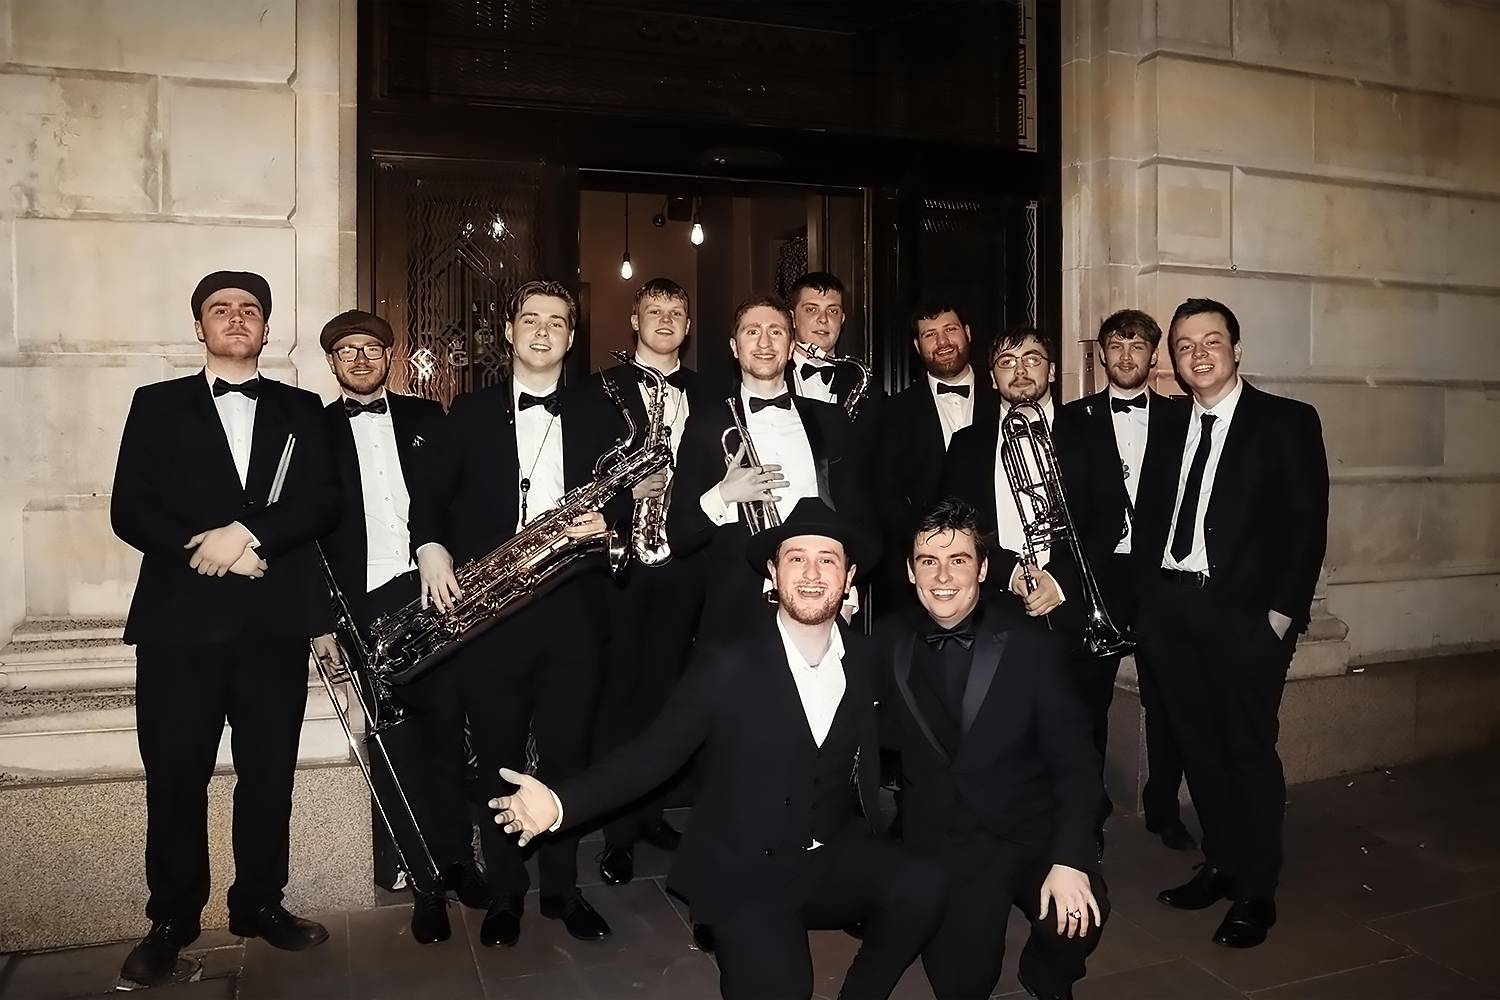 Male-fronted Jazz &amp; Swing Big Band